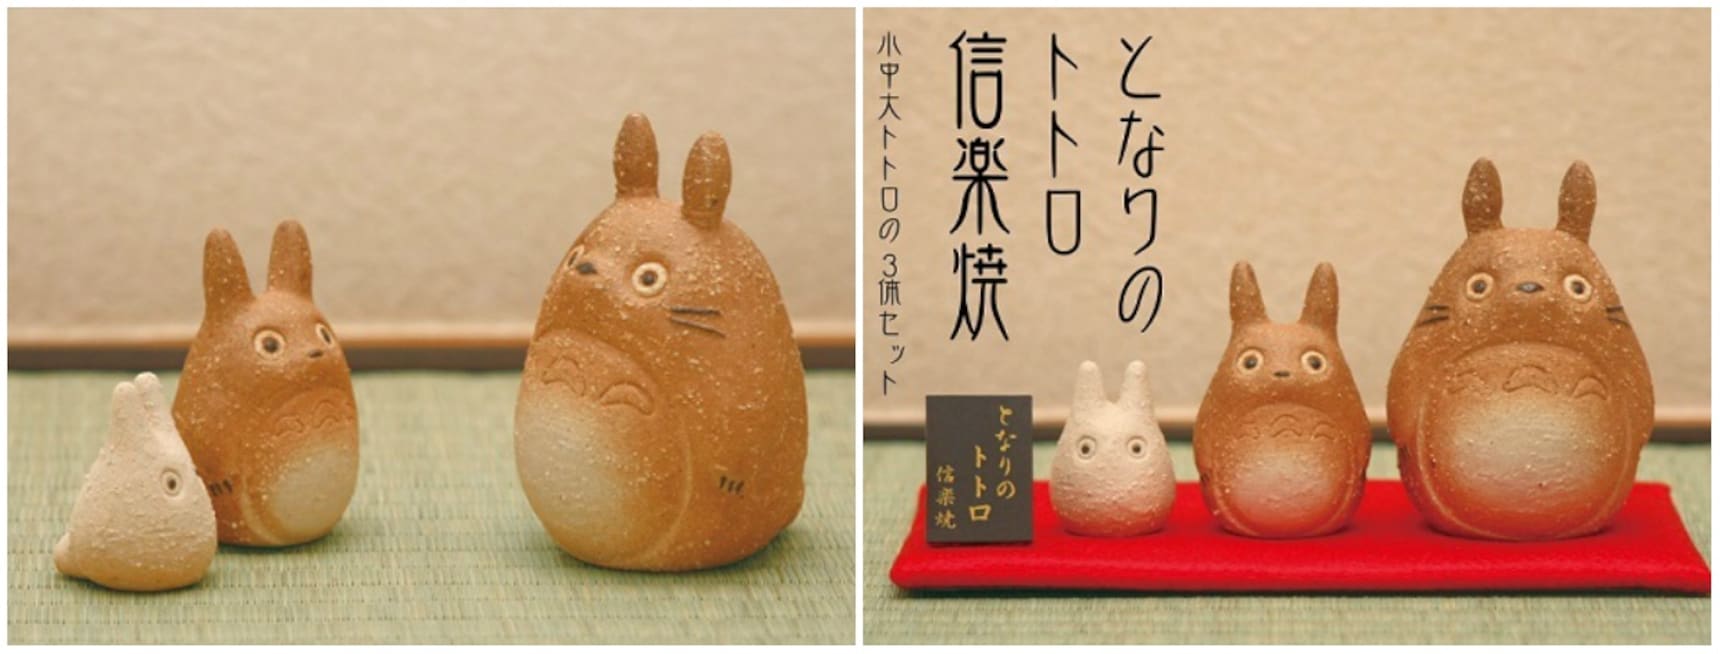 Tradition Meets Totoro in New Stoneware Set